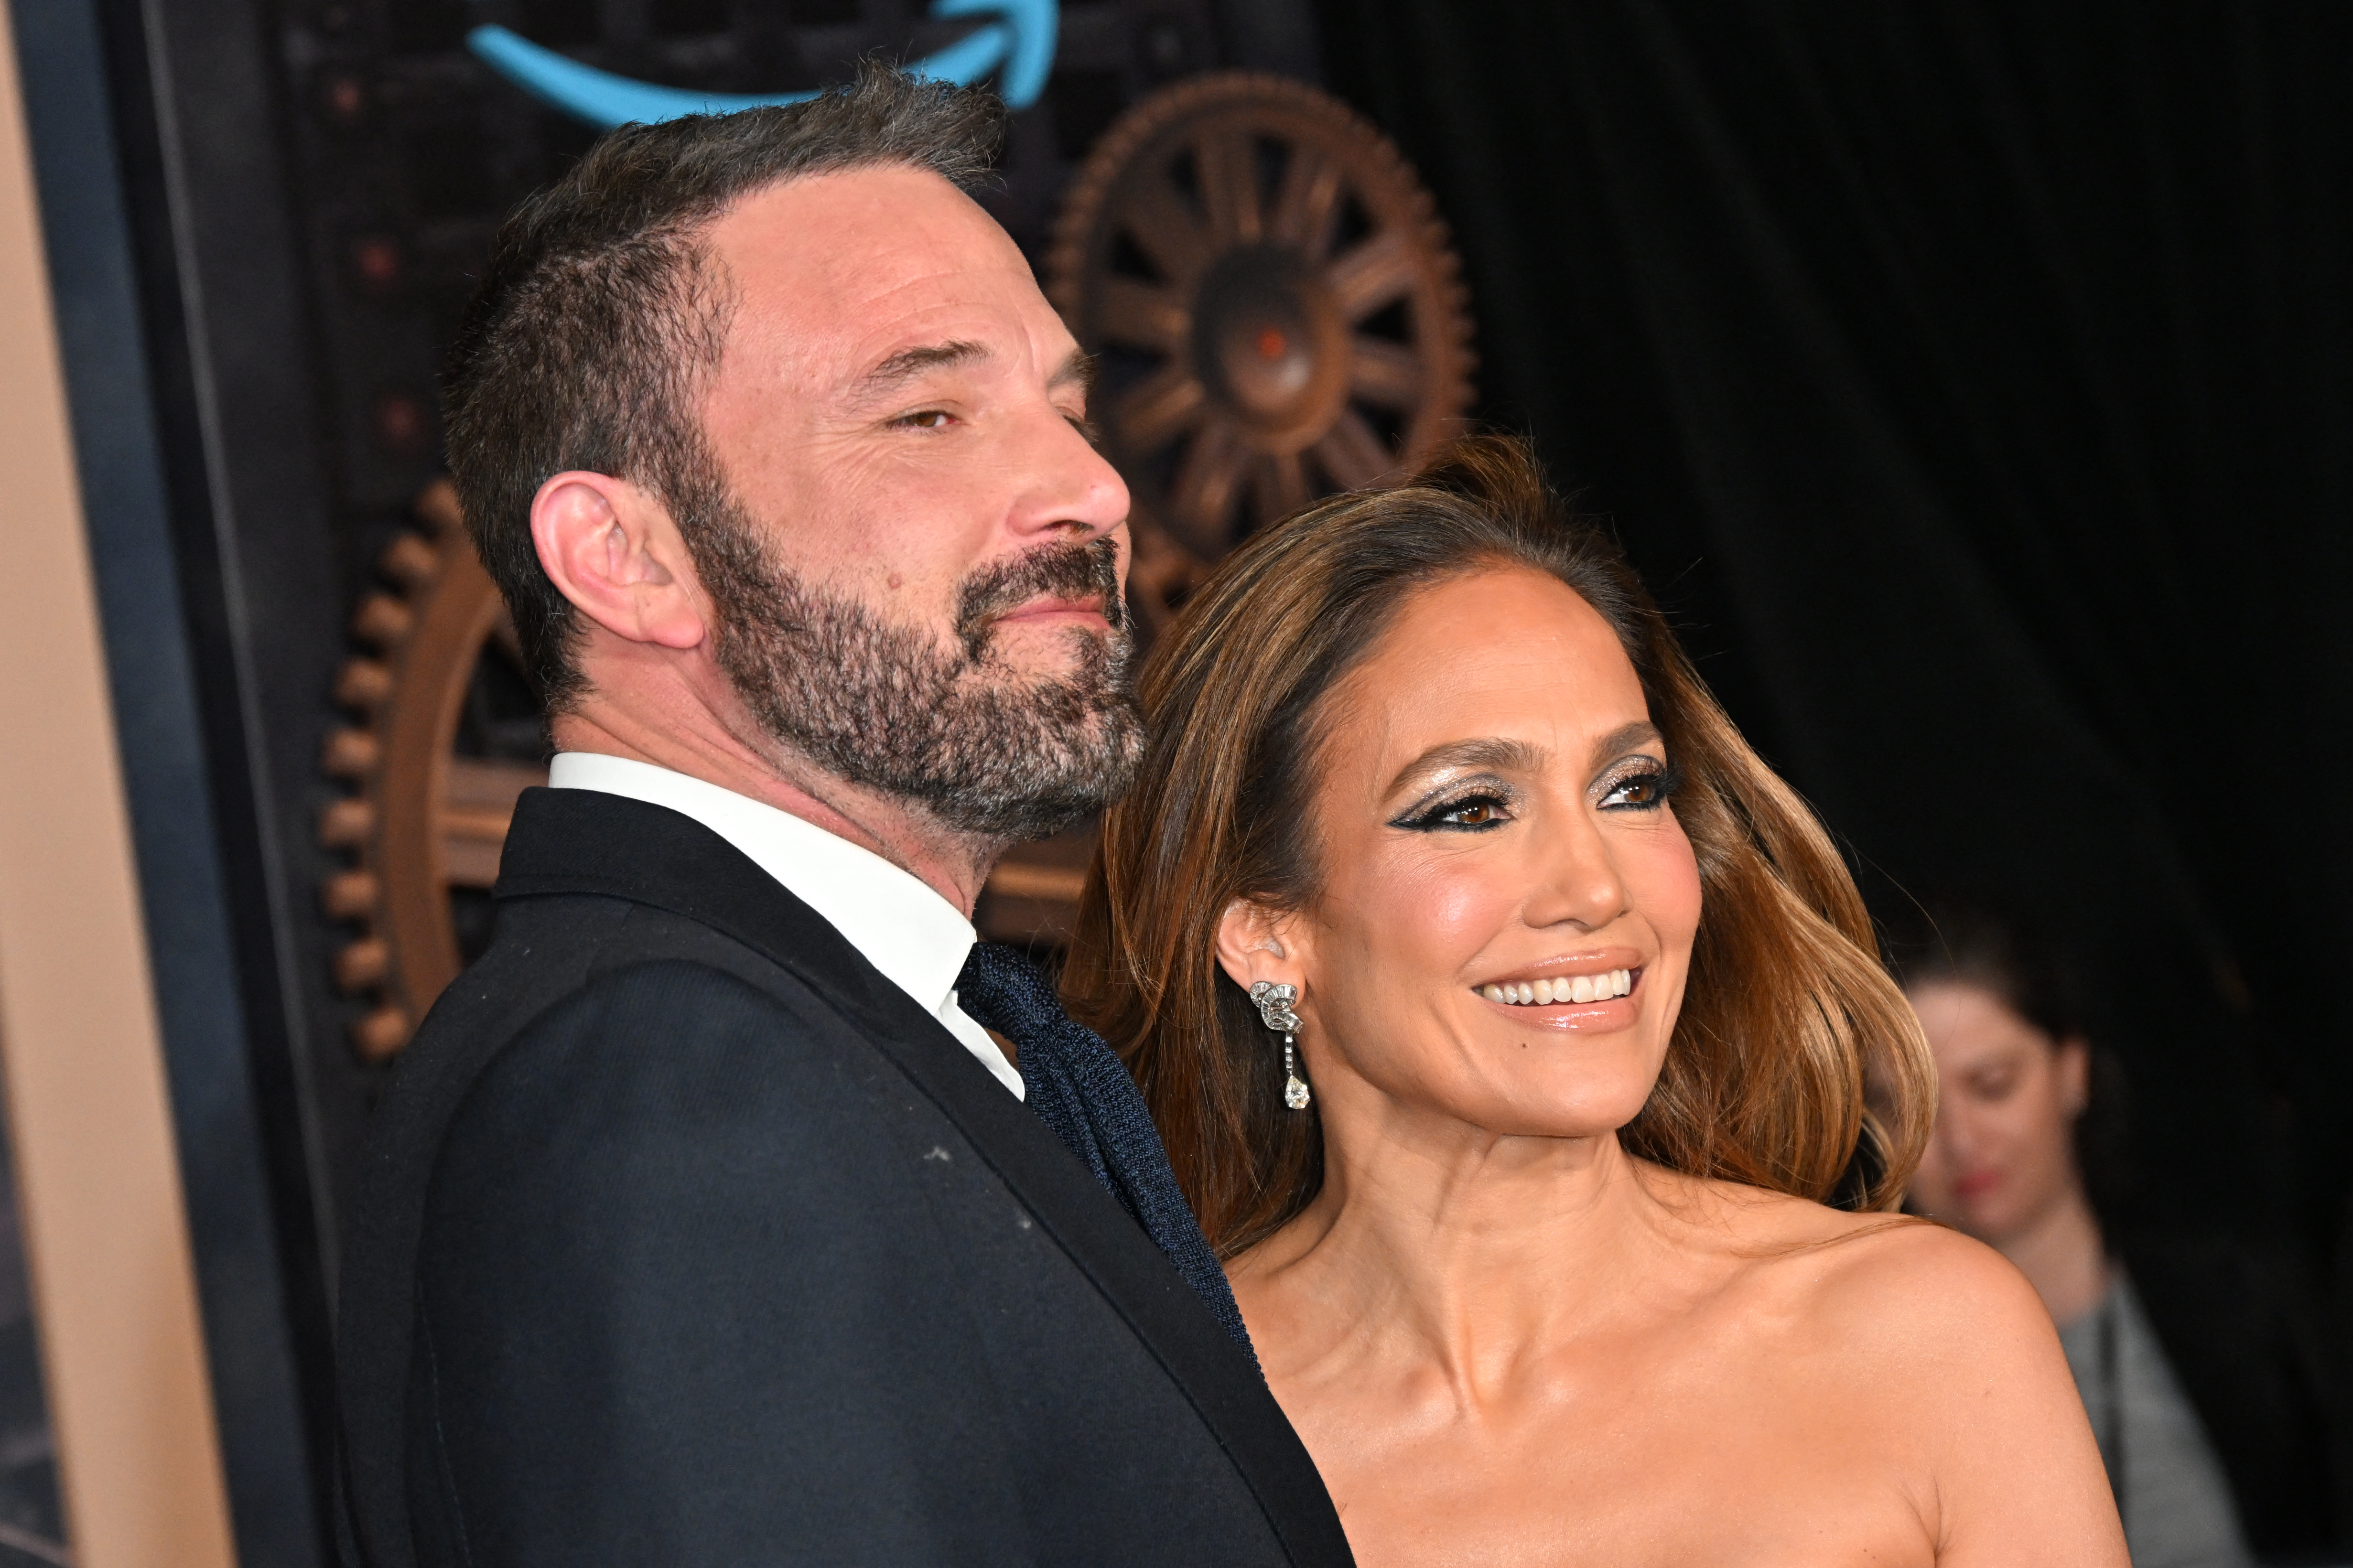 Ben Affleck and Jennifer Lopez step out with wedding rings amid
breakup rumors